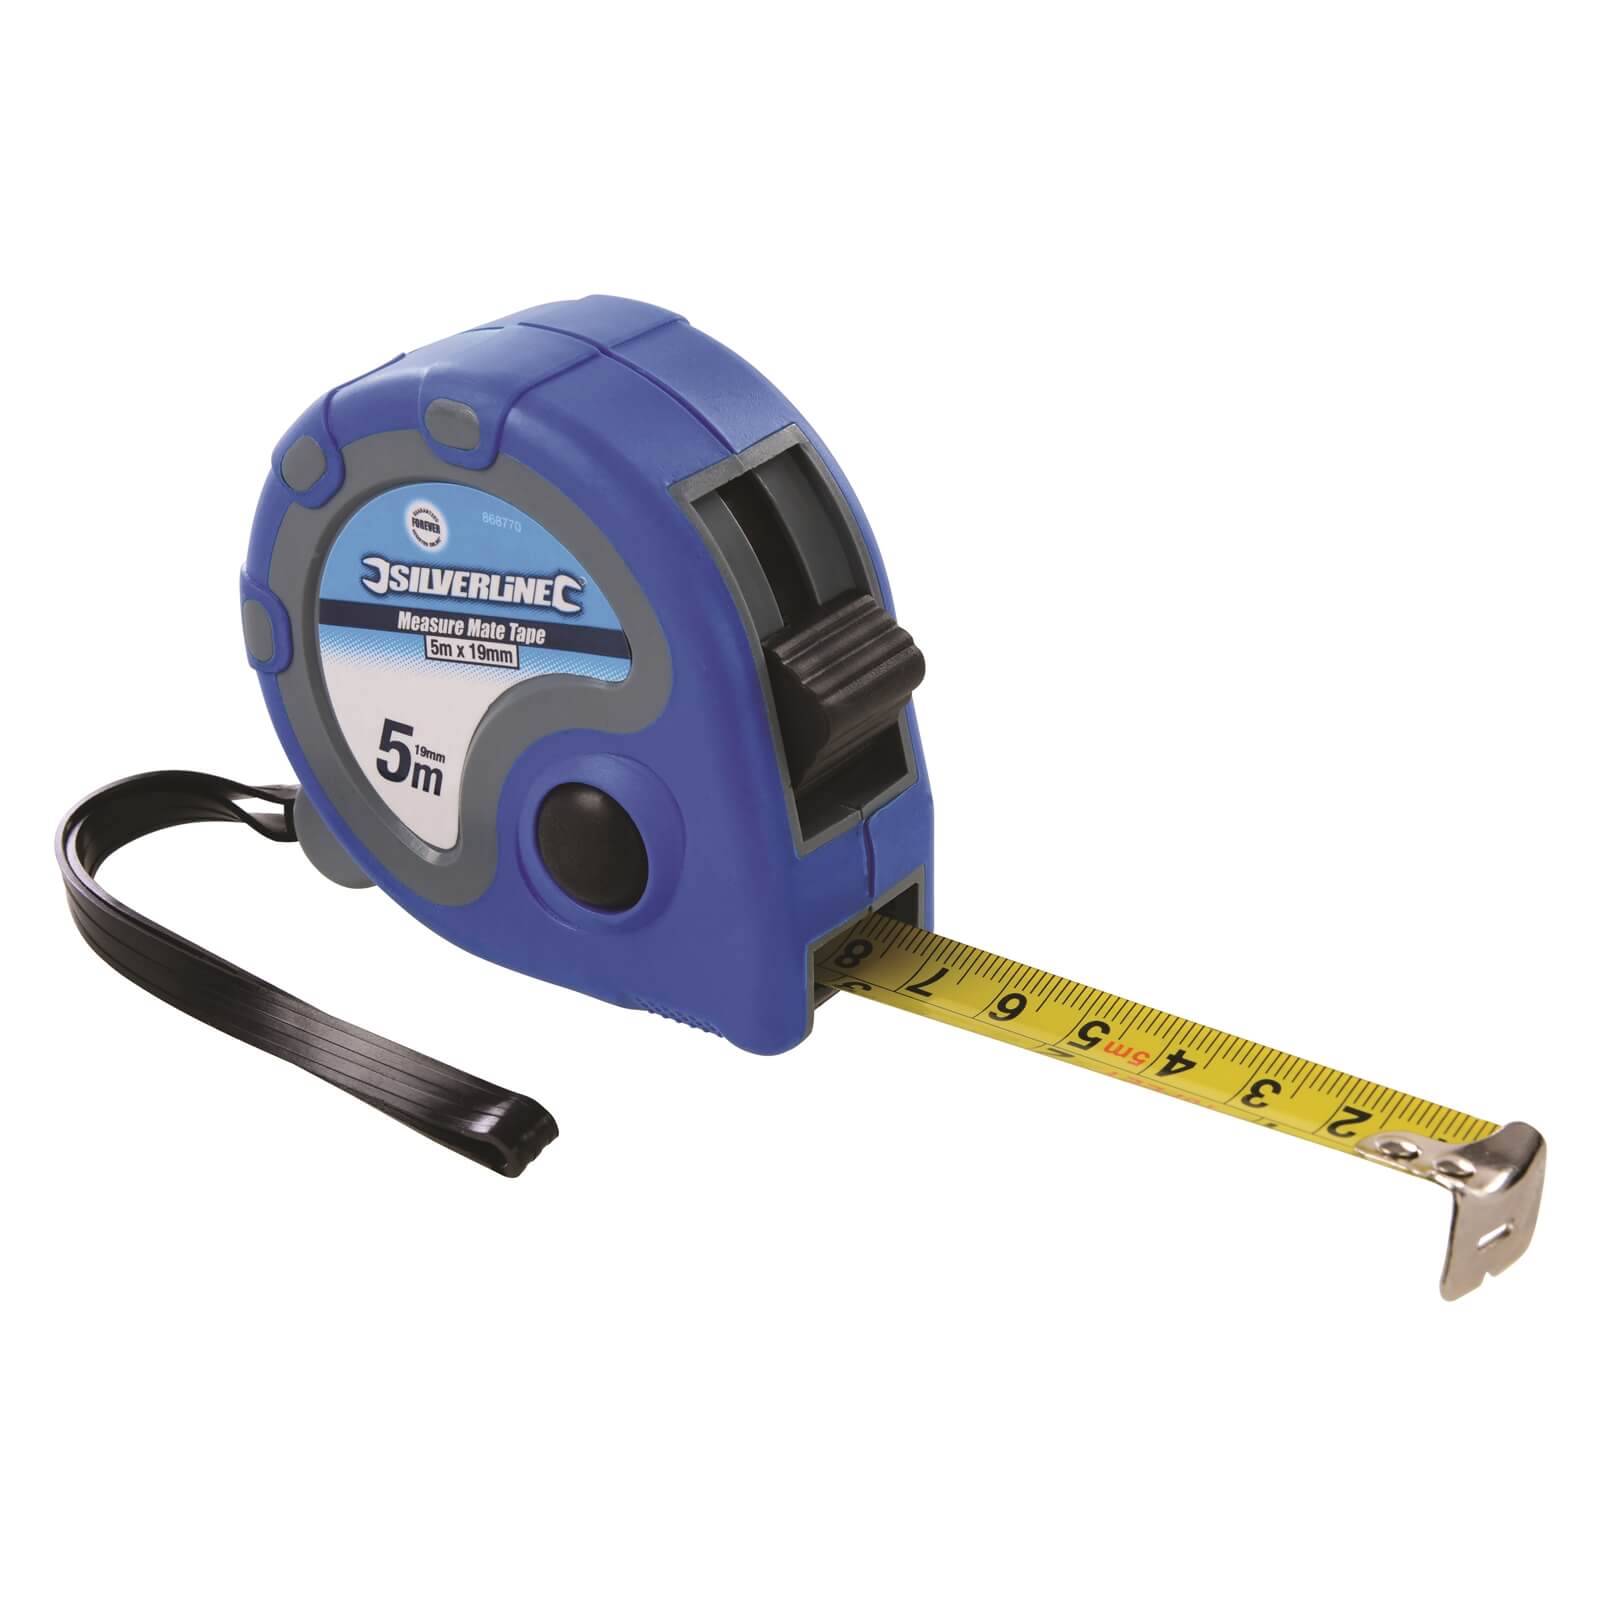 Silverline Measure Mate Tape 5m / 16ft x 19mm